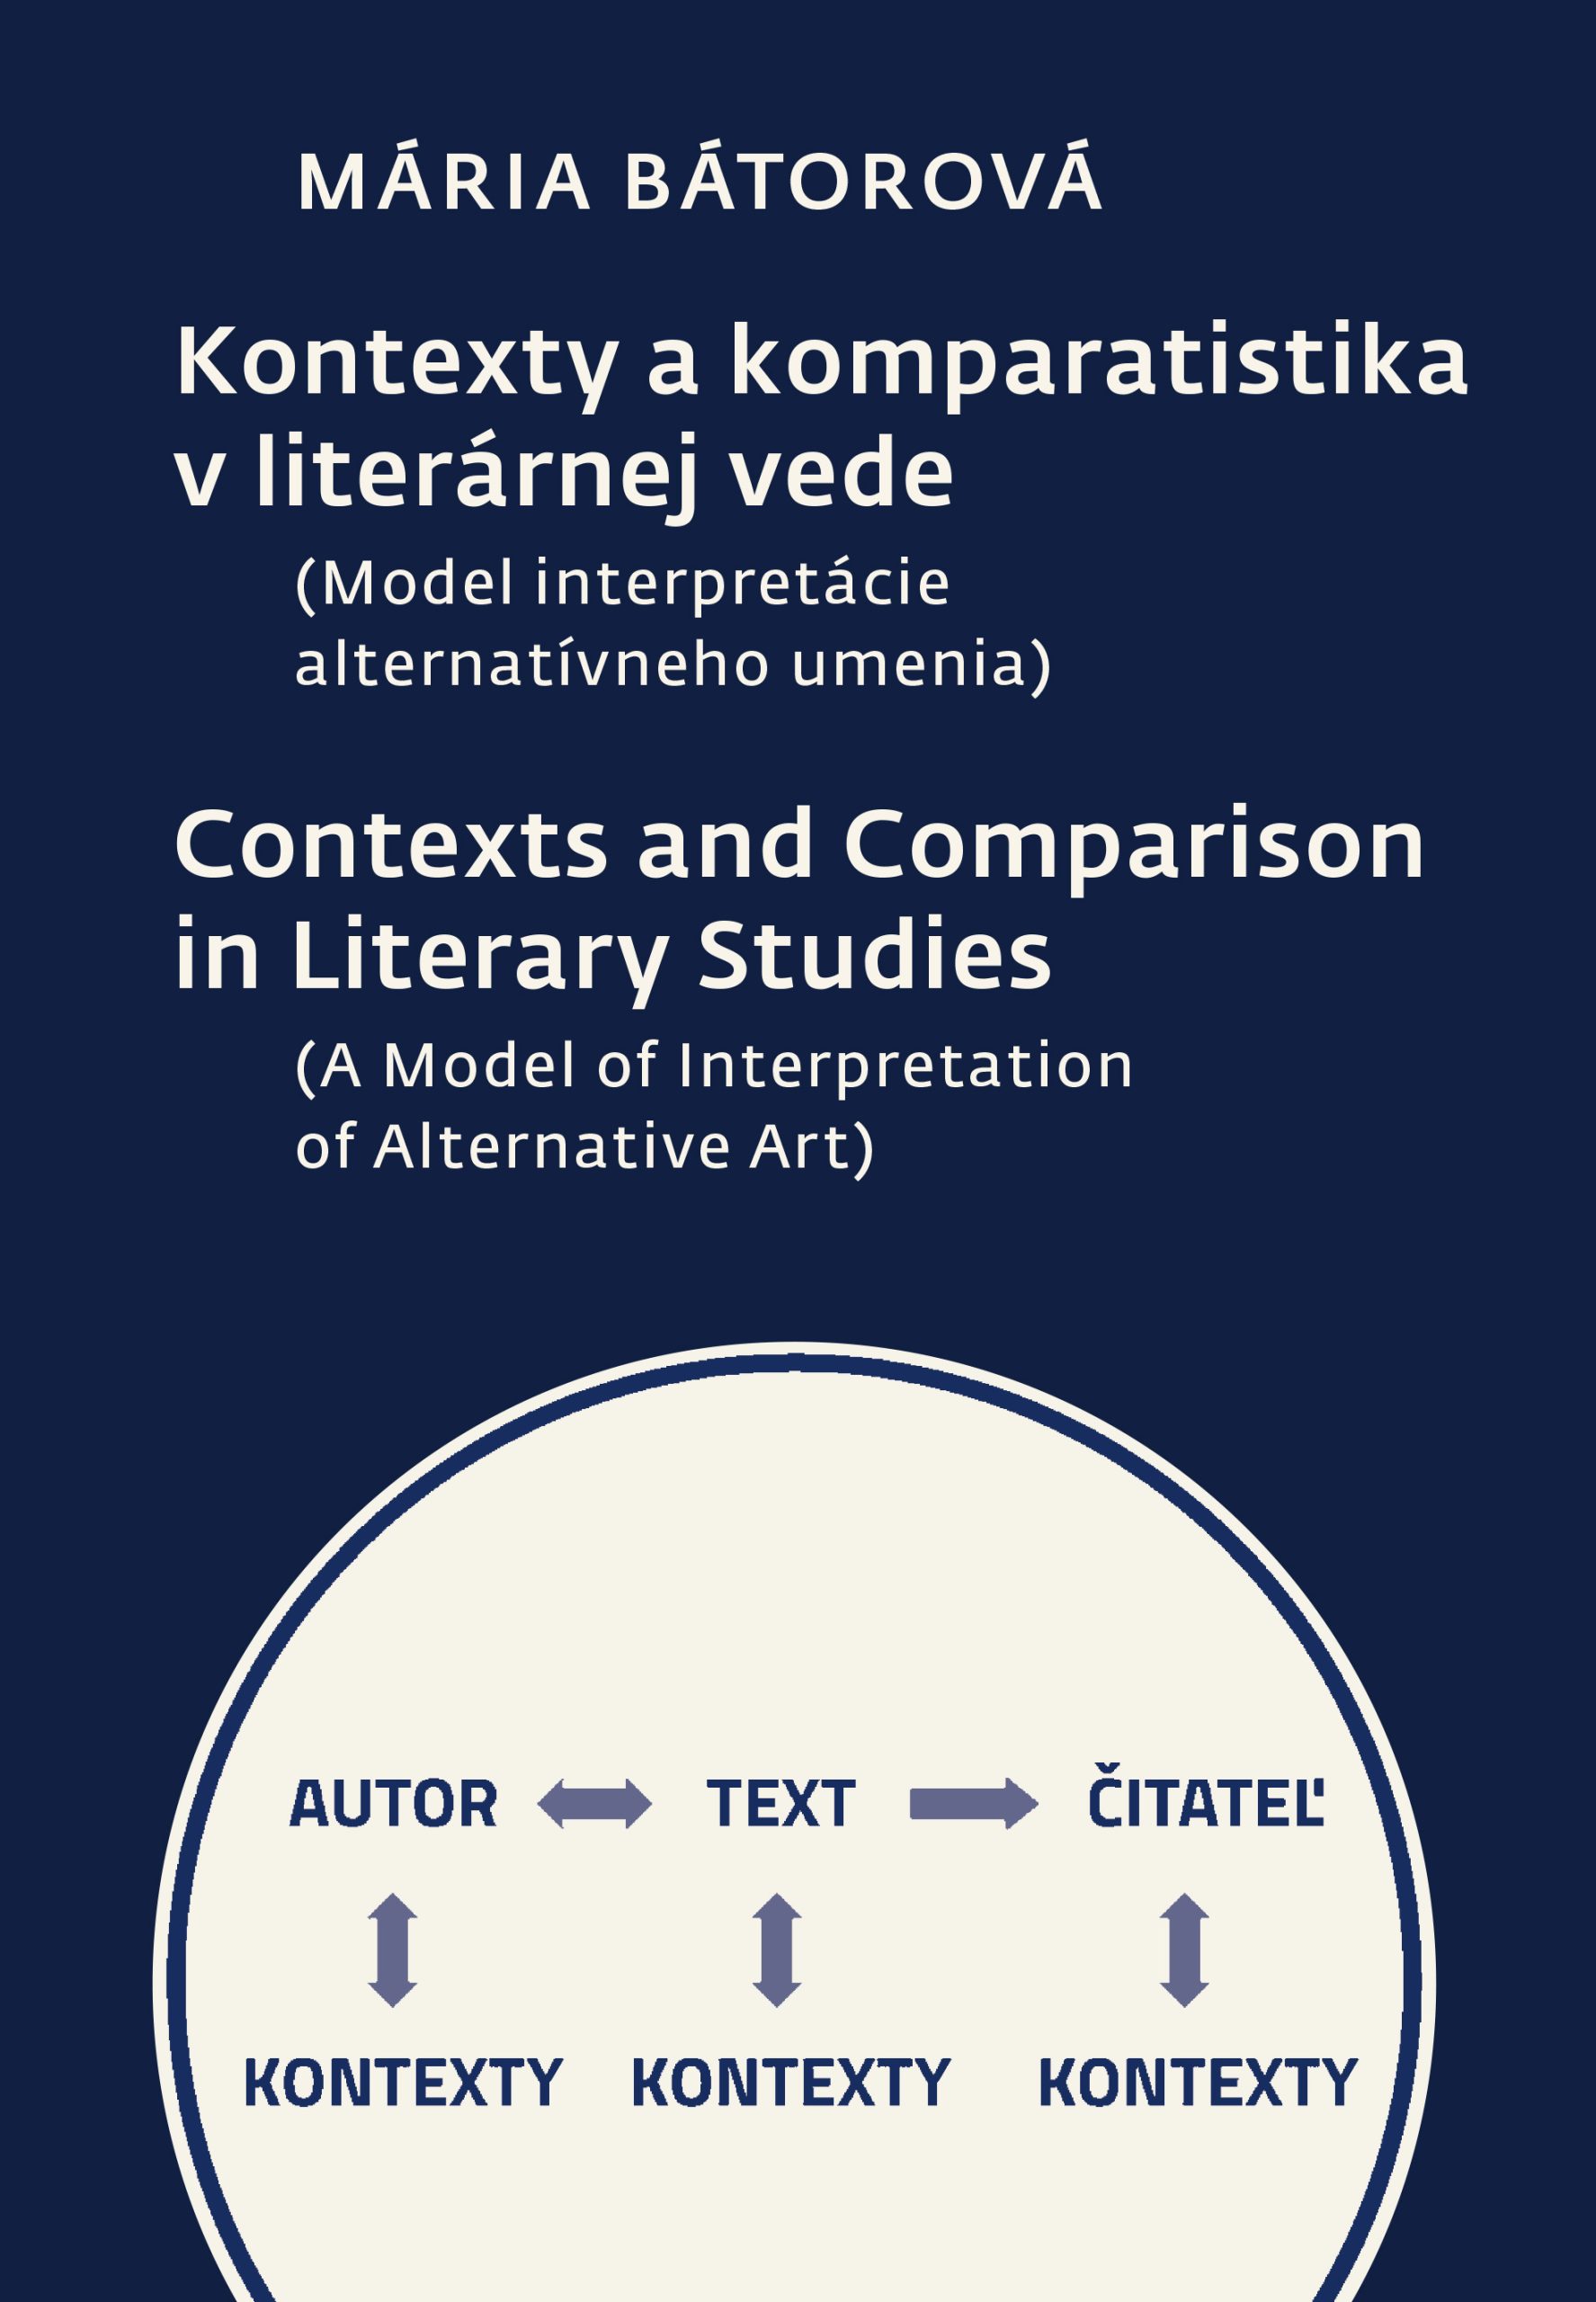 Contexts and Comparison in Literary Studies